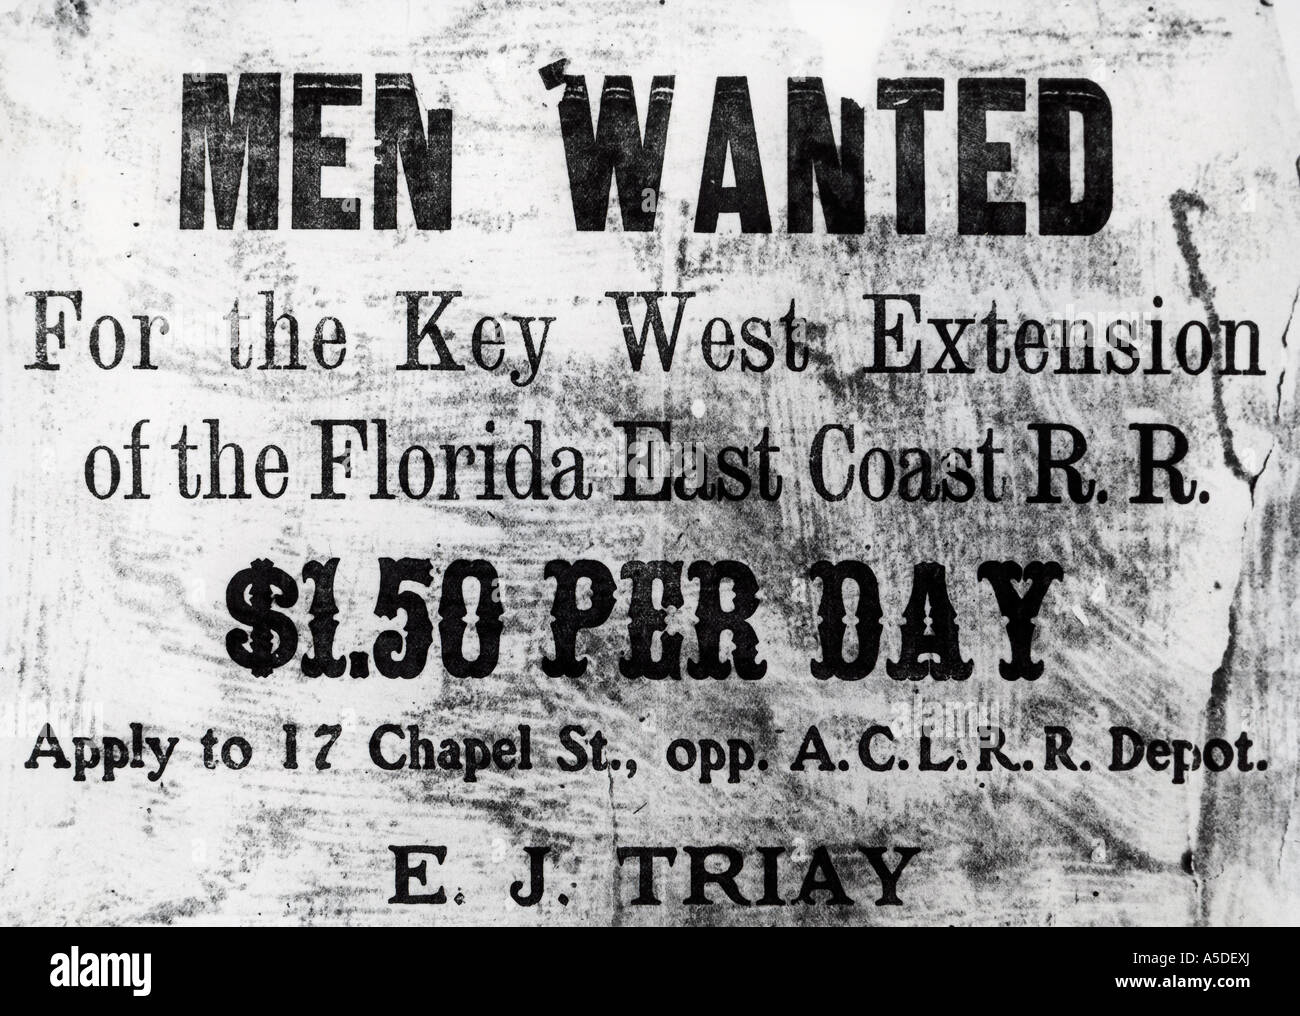 Help wanted poster Key West extension Stock Photo